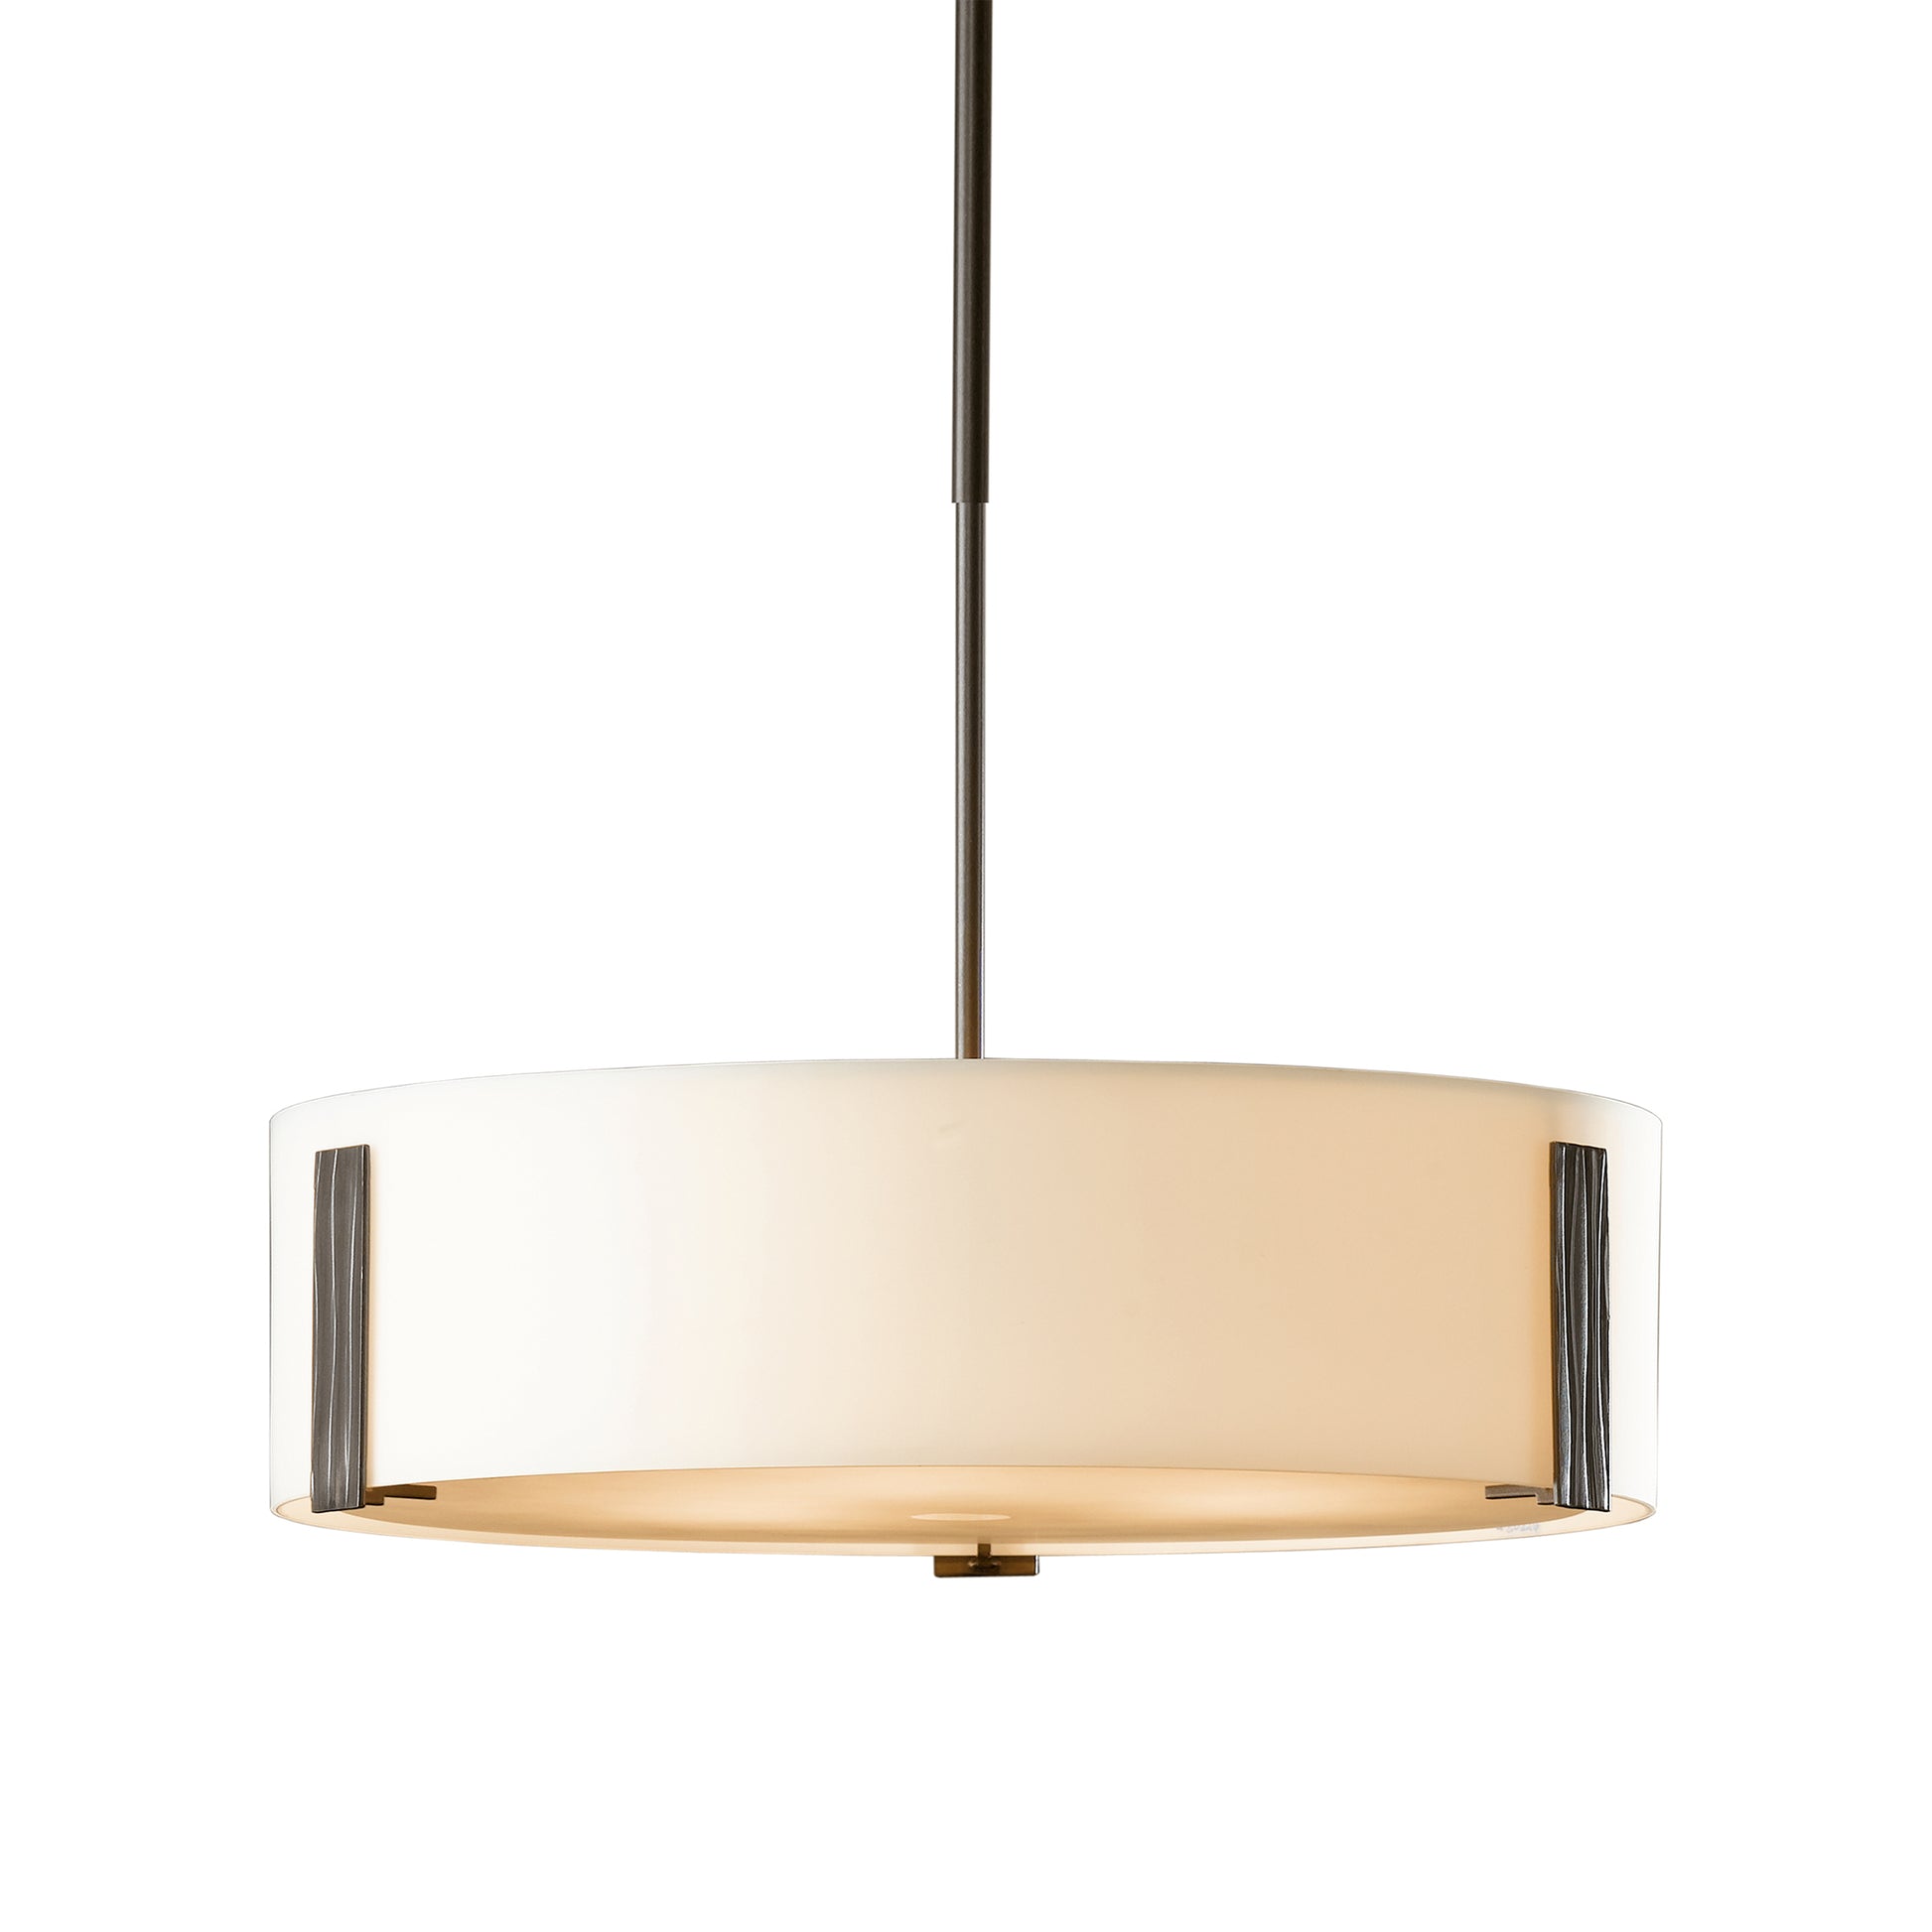 A Hubbardton Forge Impressions pendant, a modern hand-forged lighting fixture with a white shade.